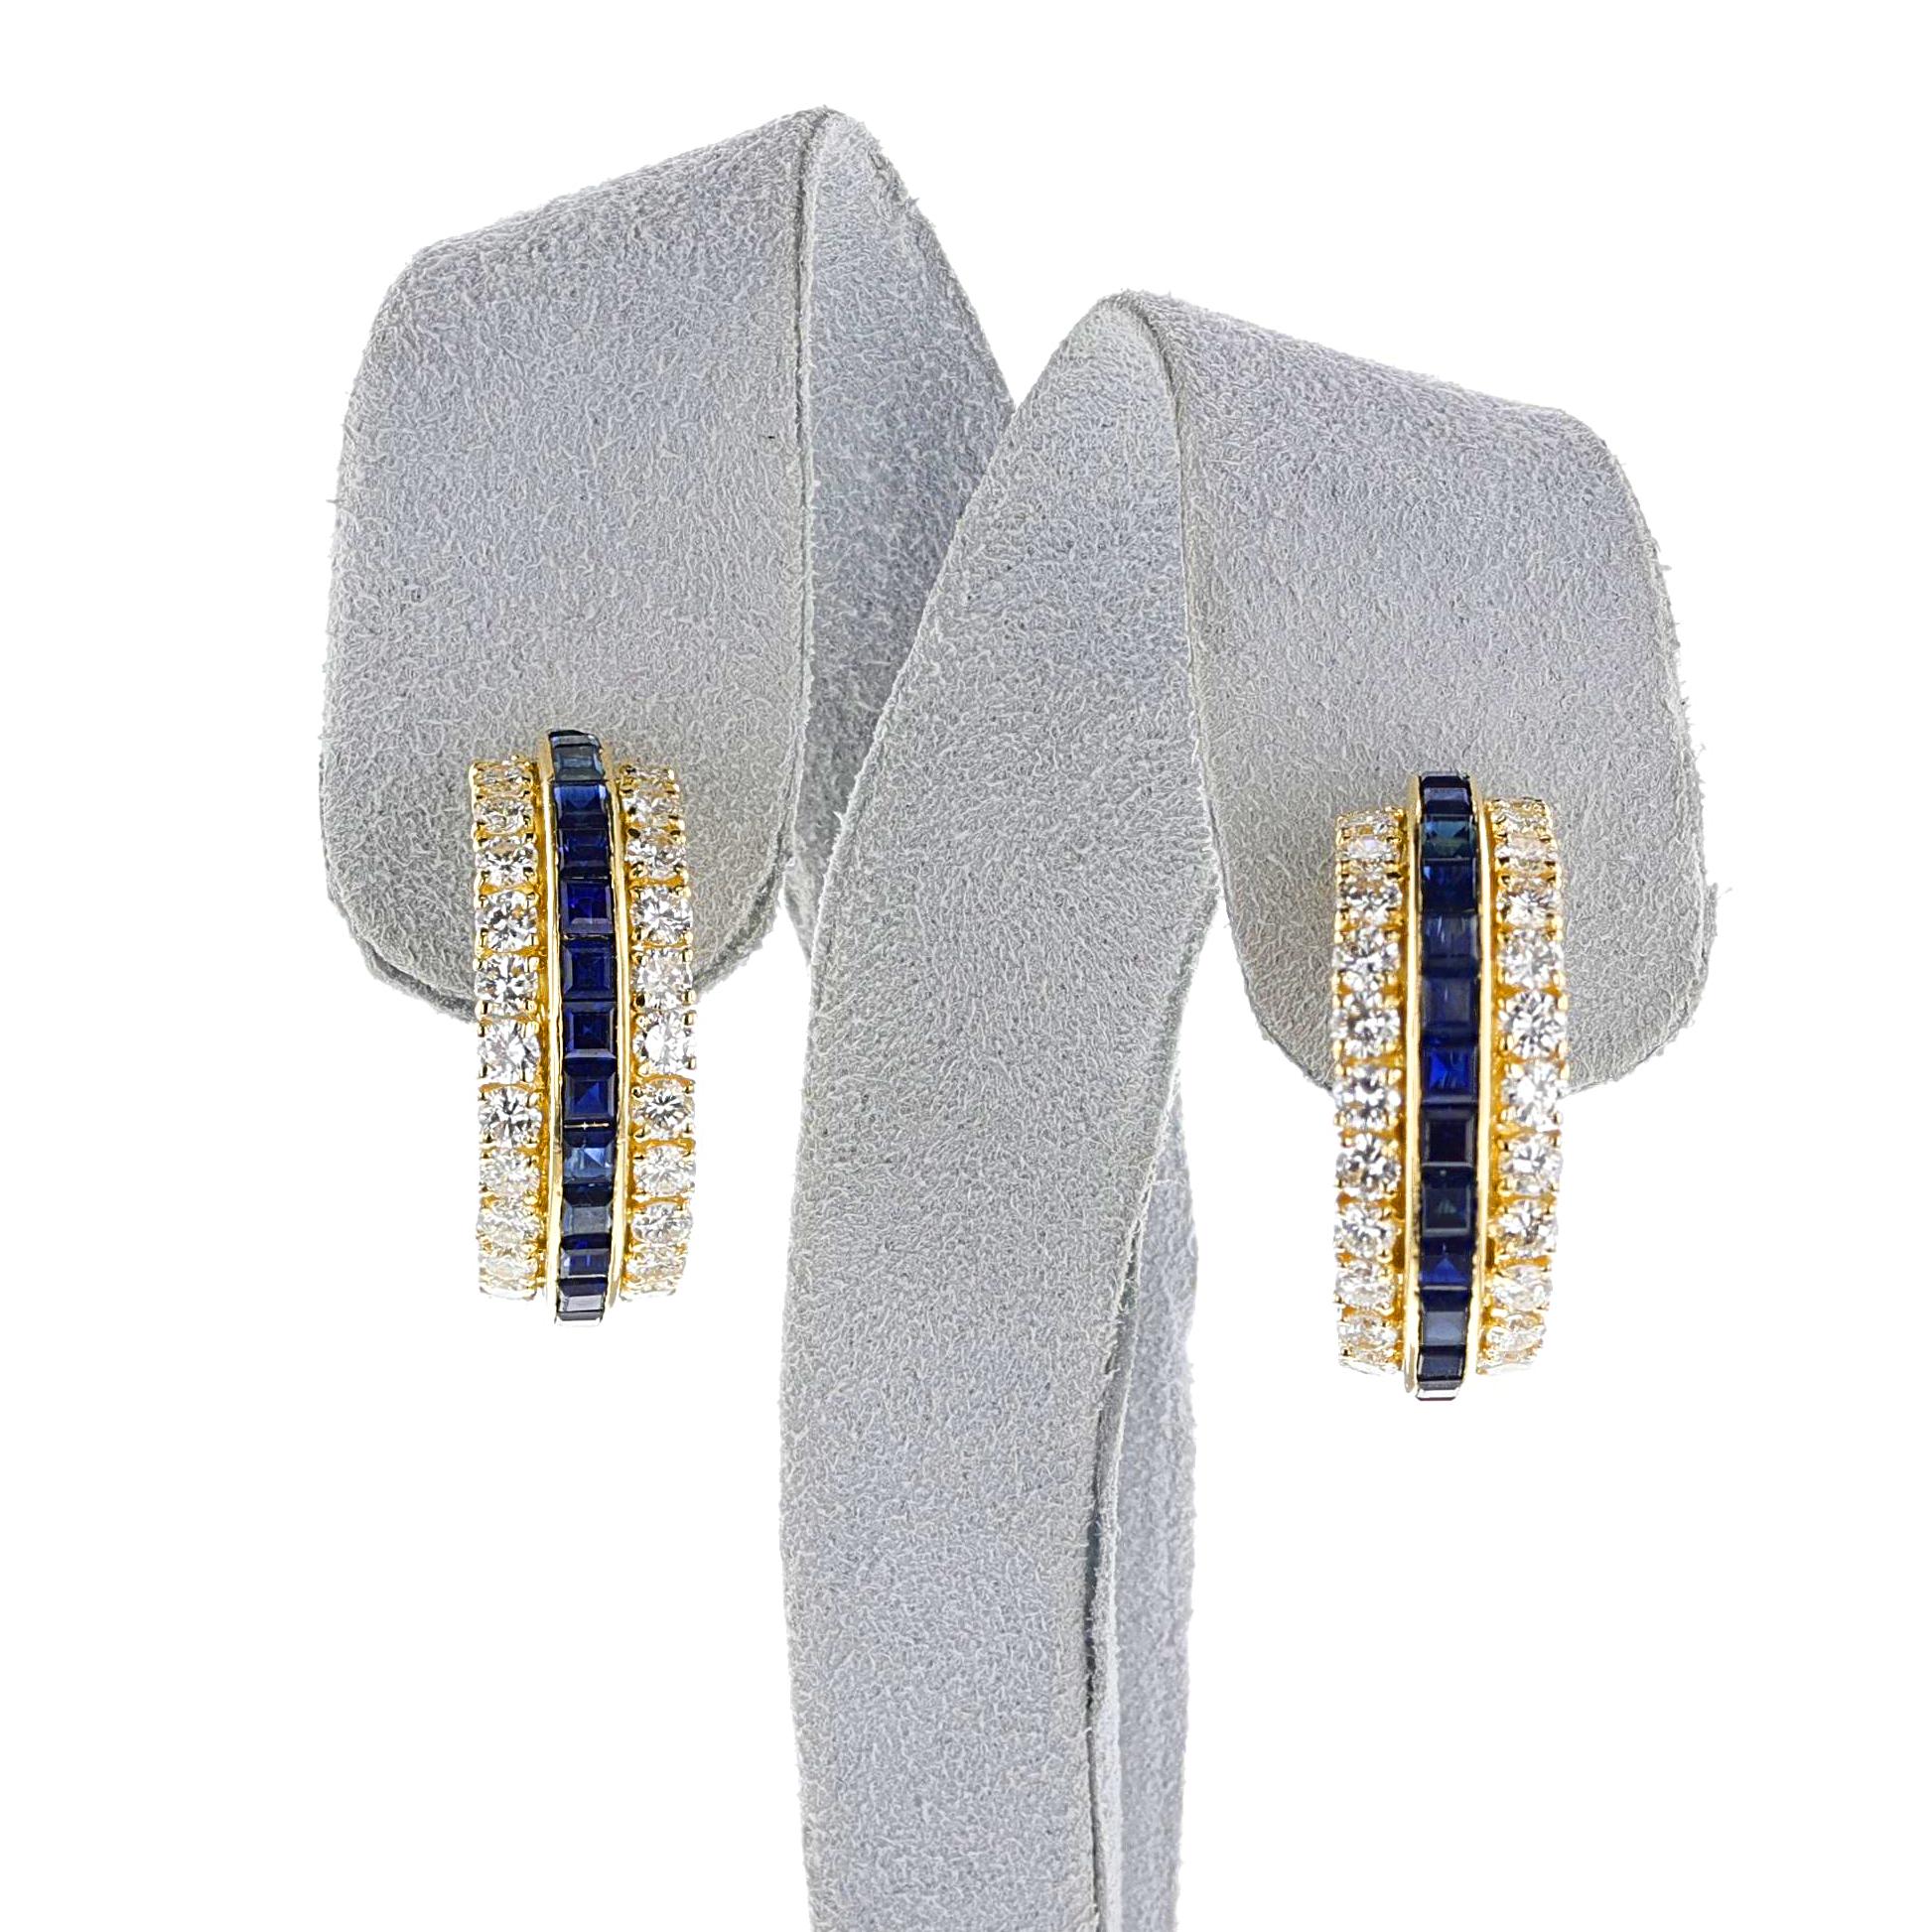 A Van Cleef & Arpels Sapphire and Diamond Half Hoop Earrings made in 18k Yellow Gold. The sapphires weigh appx. 5 carats and the diamonds weigh appx. 3.50 carats. Copy of Polishing Receipt from Van Cleef & Arpels, dated April 2024.



SKU: 1517